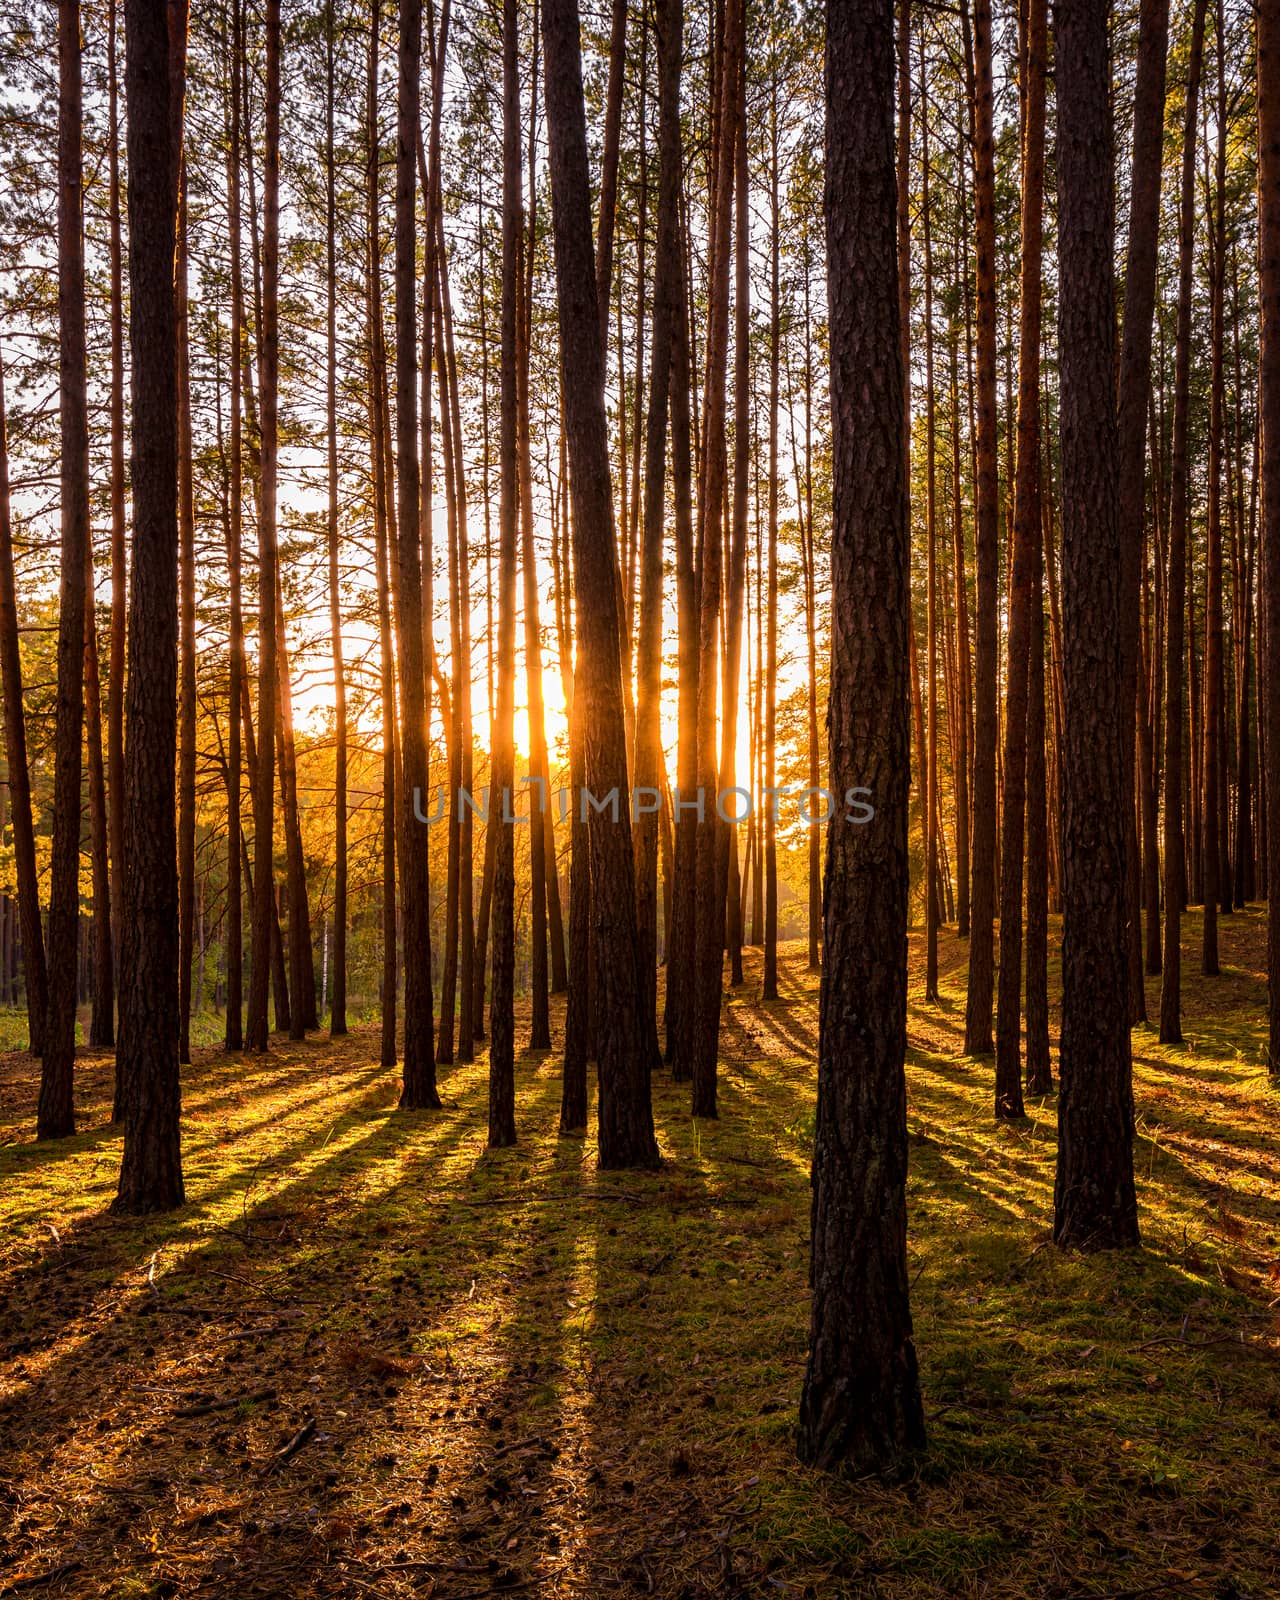 Sunset or sunrise in the autumn pine forest. Sunbeams shining between tree trunks.